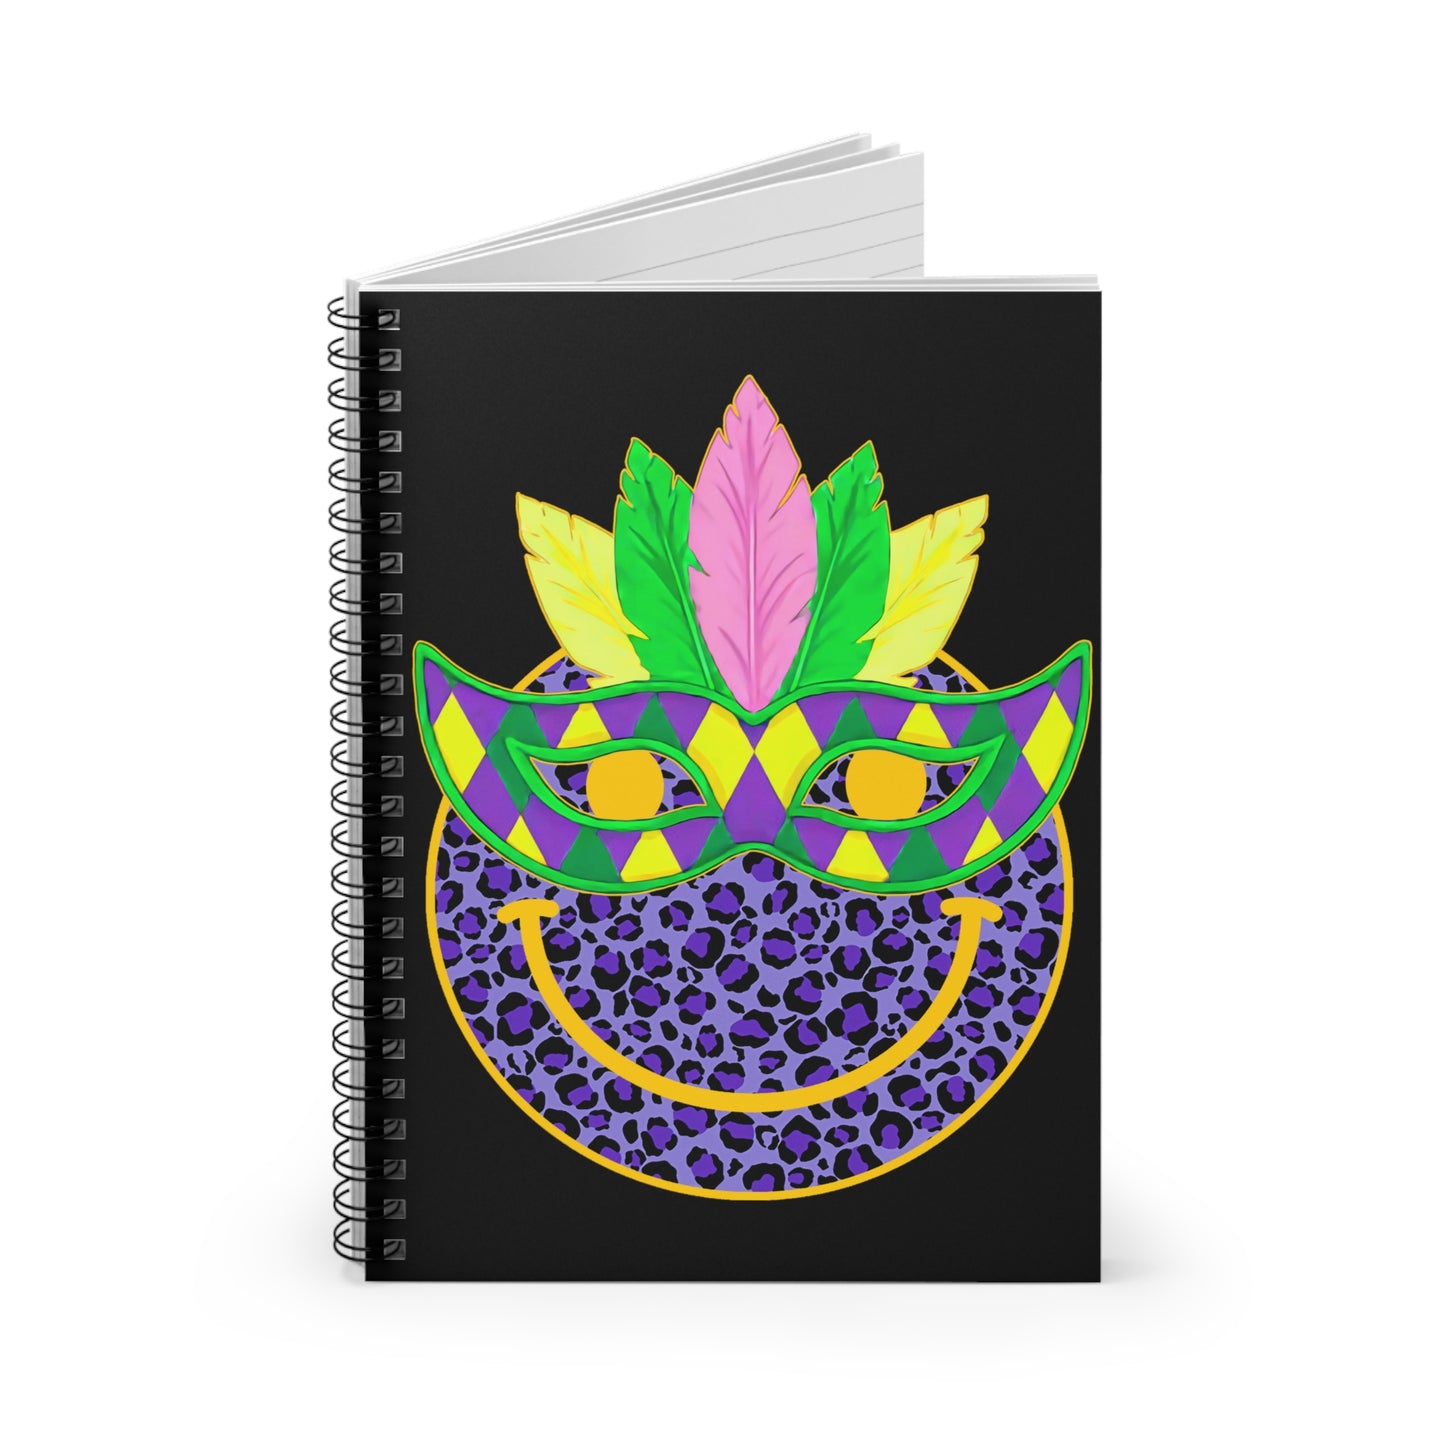 Mardi Gras Cat Mask: Spiral Notebook - Log Books - Journals - Diaries - and More Custom Printed by TheGlassyLass